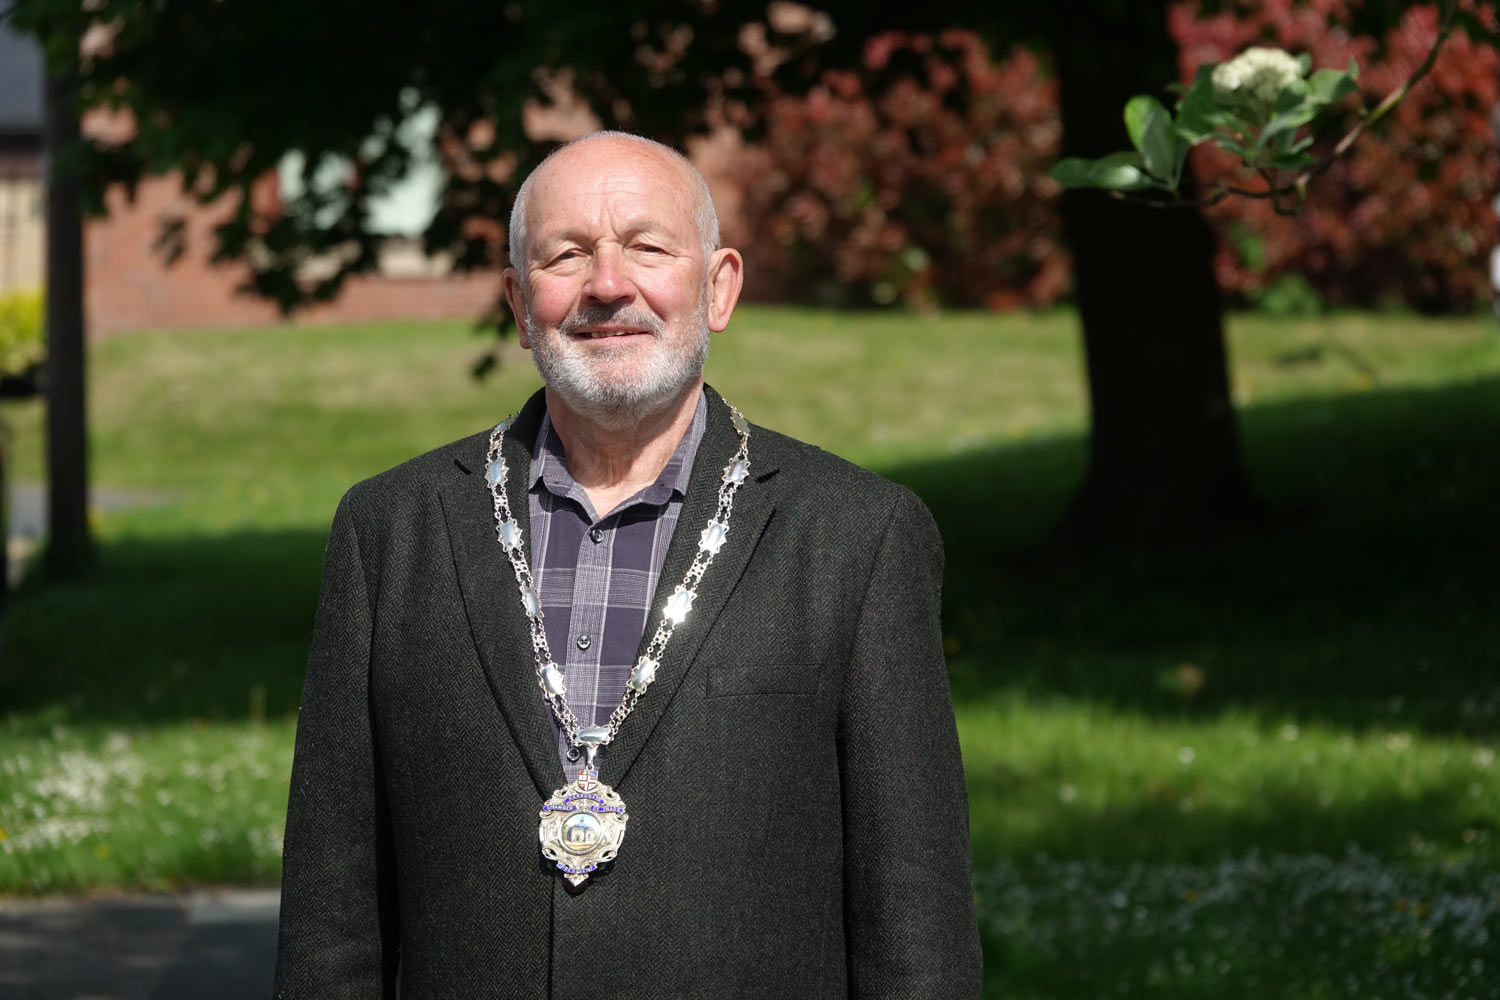 Steve Scarre has been appointed as president of the Harrogate District Chamber of Commerce